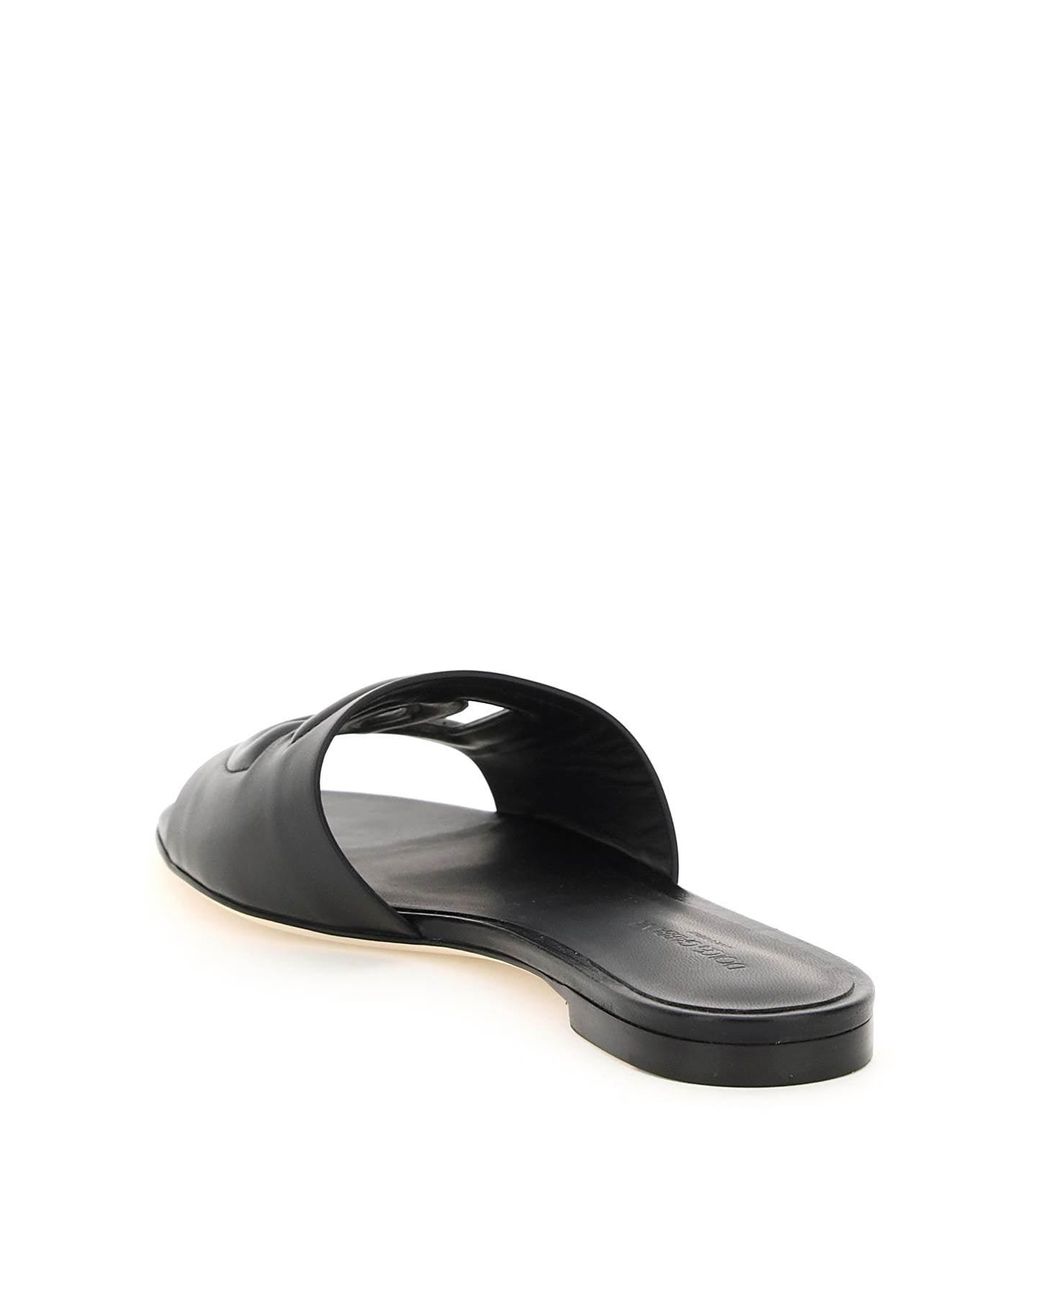 Dolce & Gabbana Leather Sliders With Logo in Black - Lyst